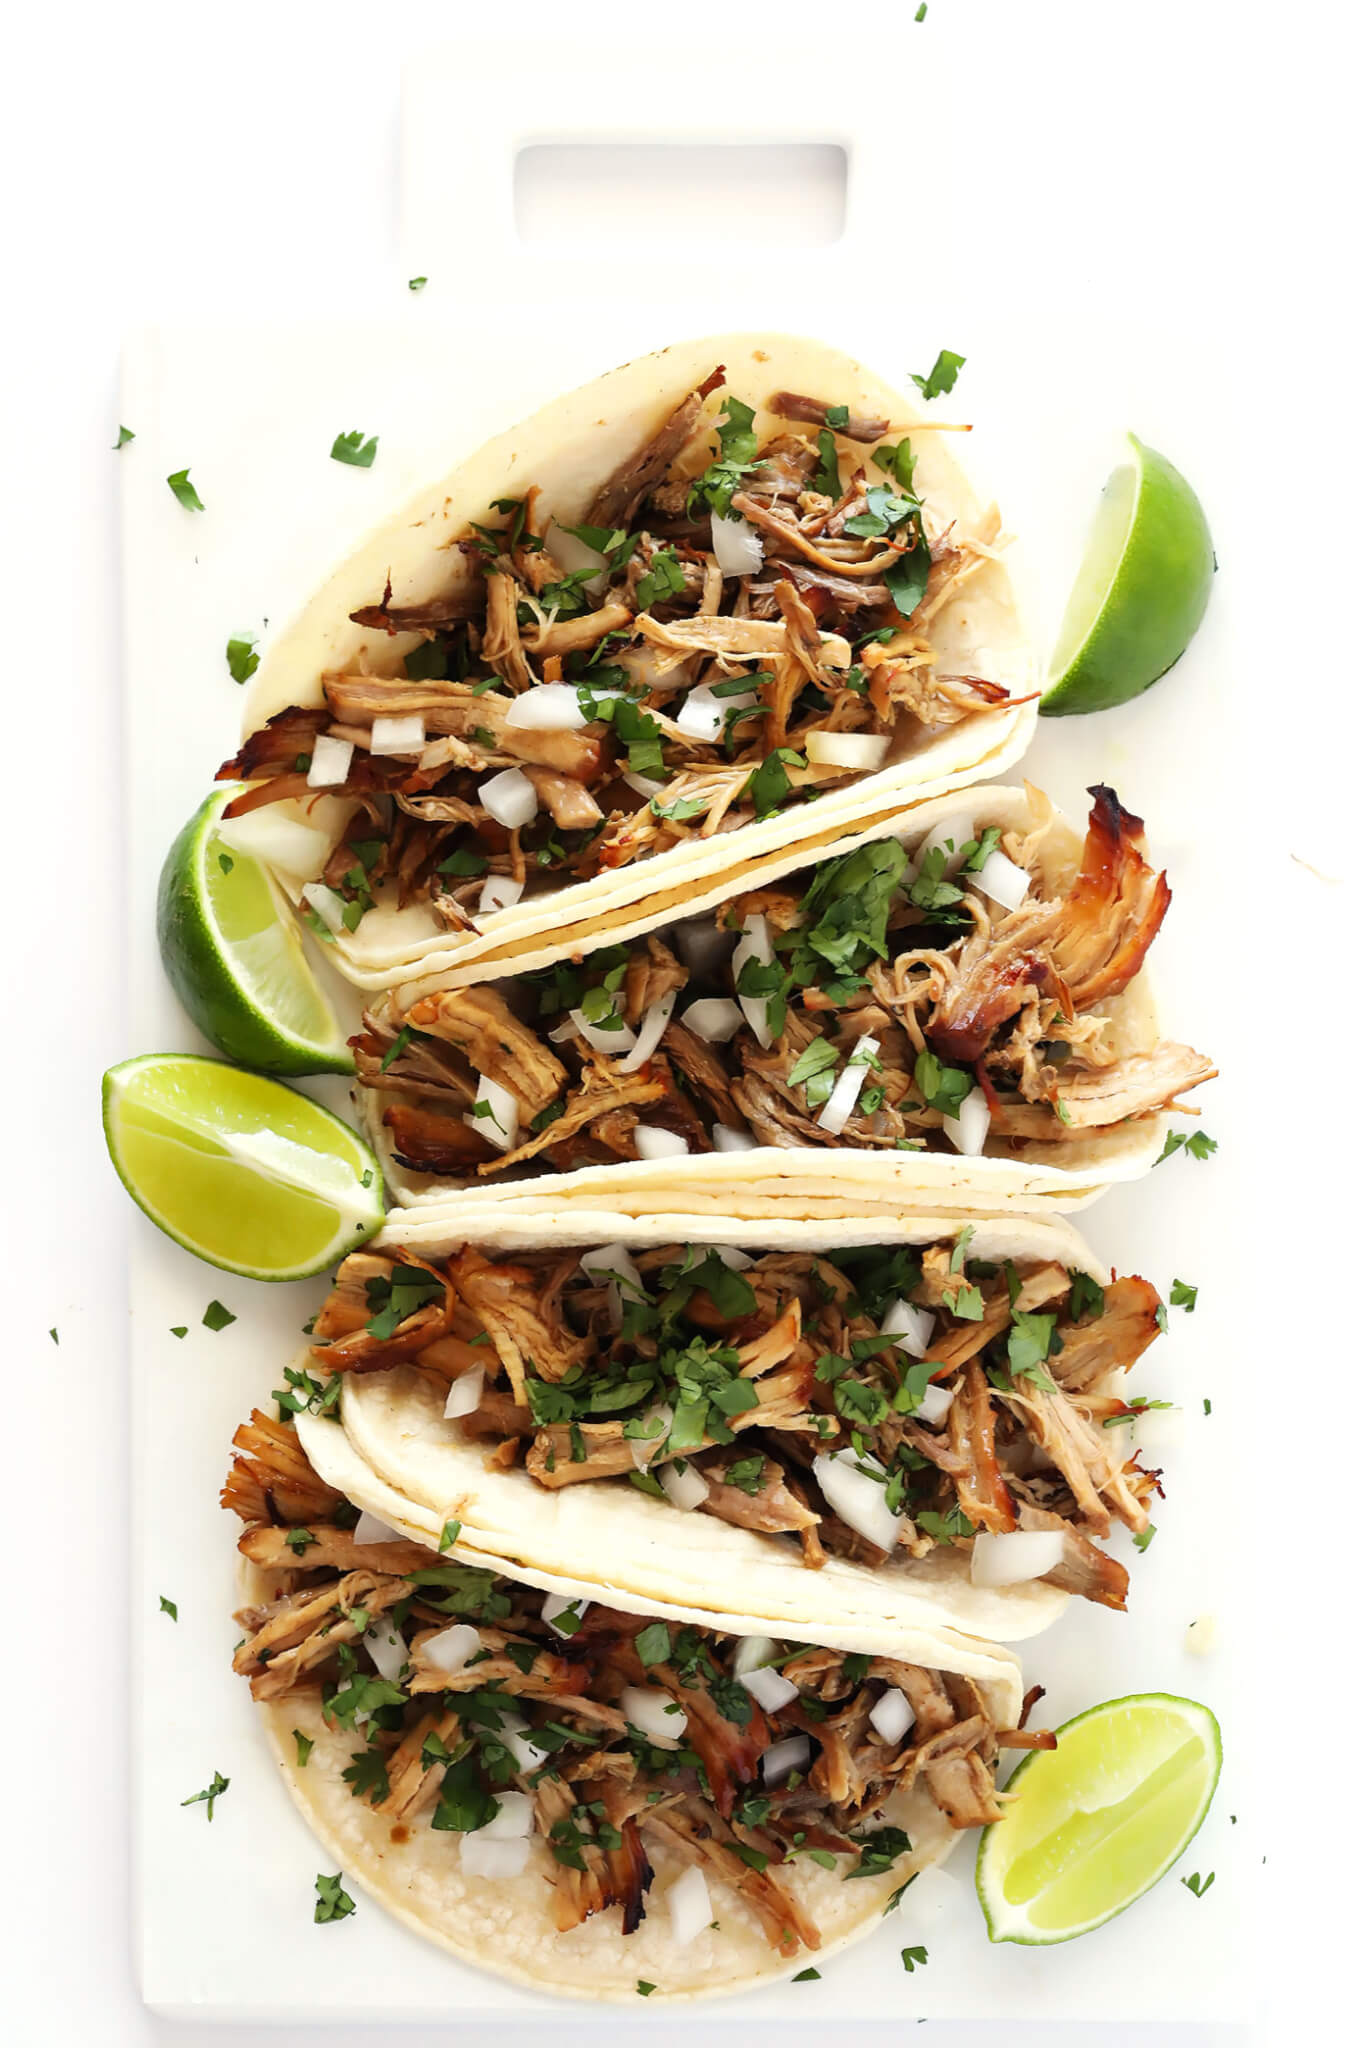 The BEST Slow Cooker Pork Carnitas! They're easy to make in the crock pot, made with my favorite Mexican seasonings, and so crispy and delicious! Perfect for tacos, enchiladas, salads, burritos, quesadillas and more. | gimmesomeoven.com